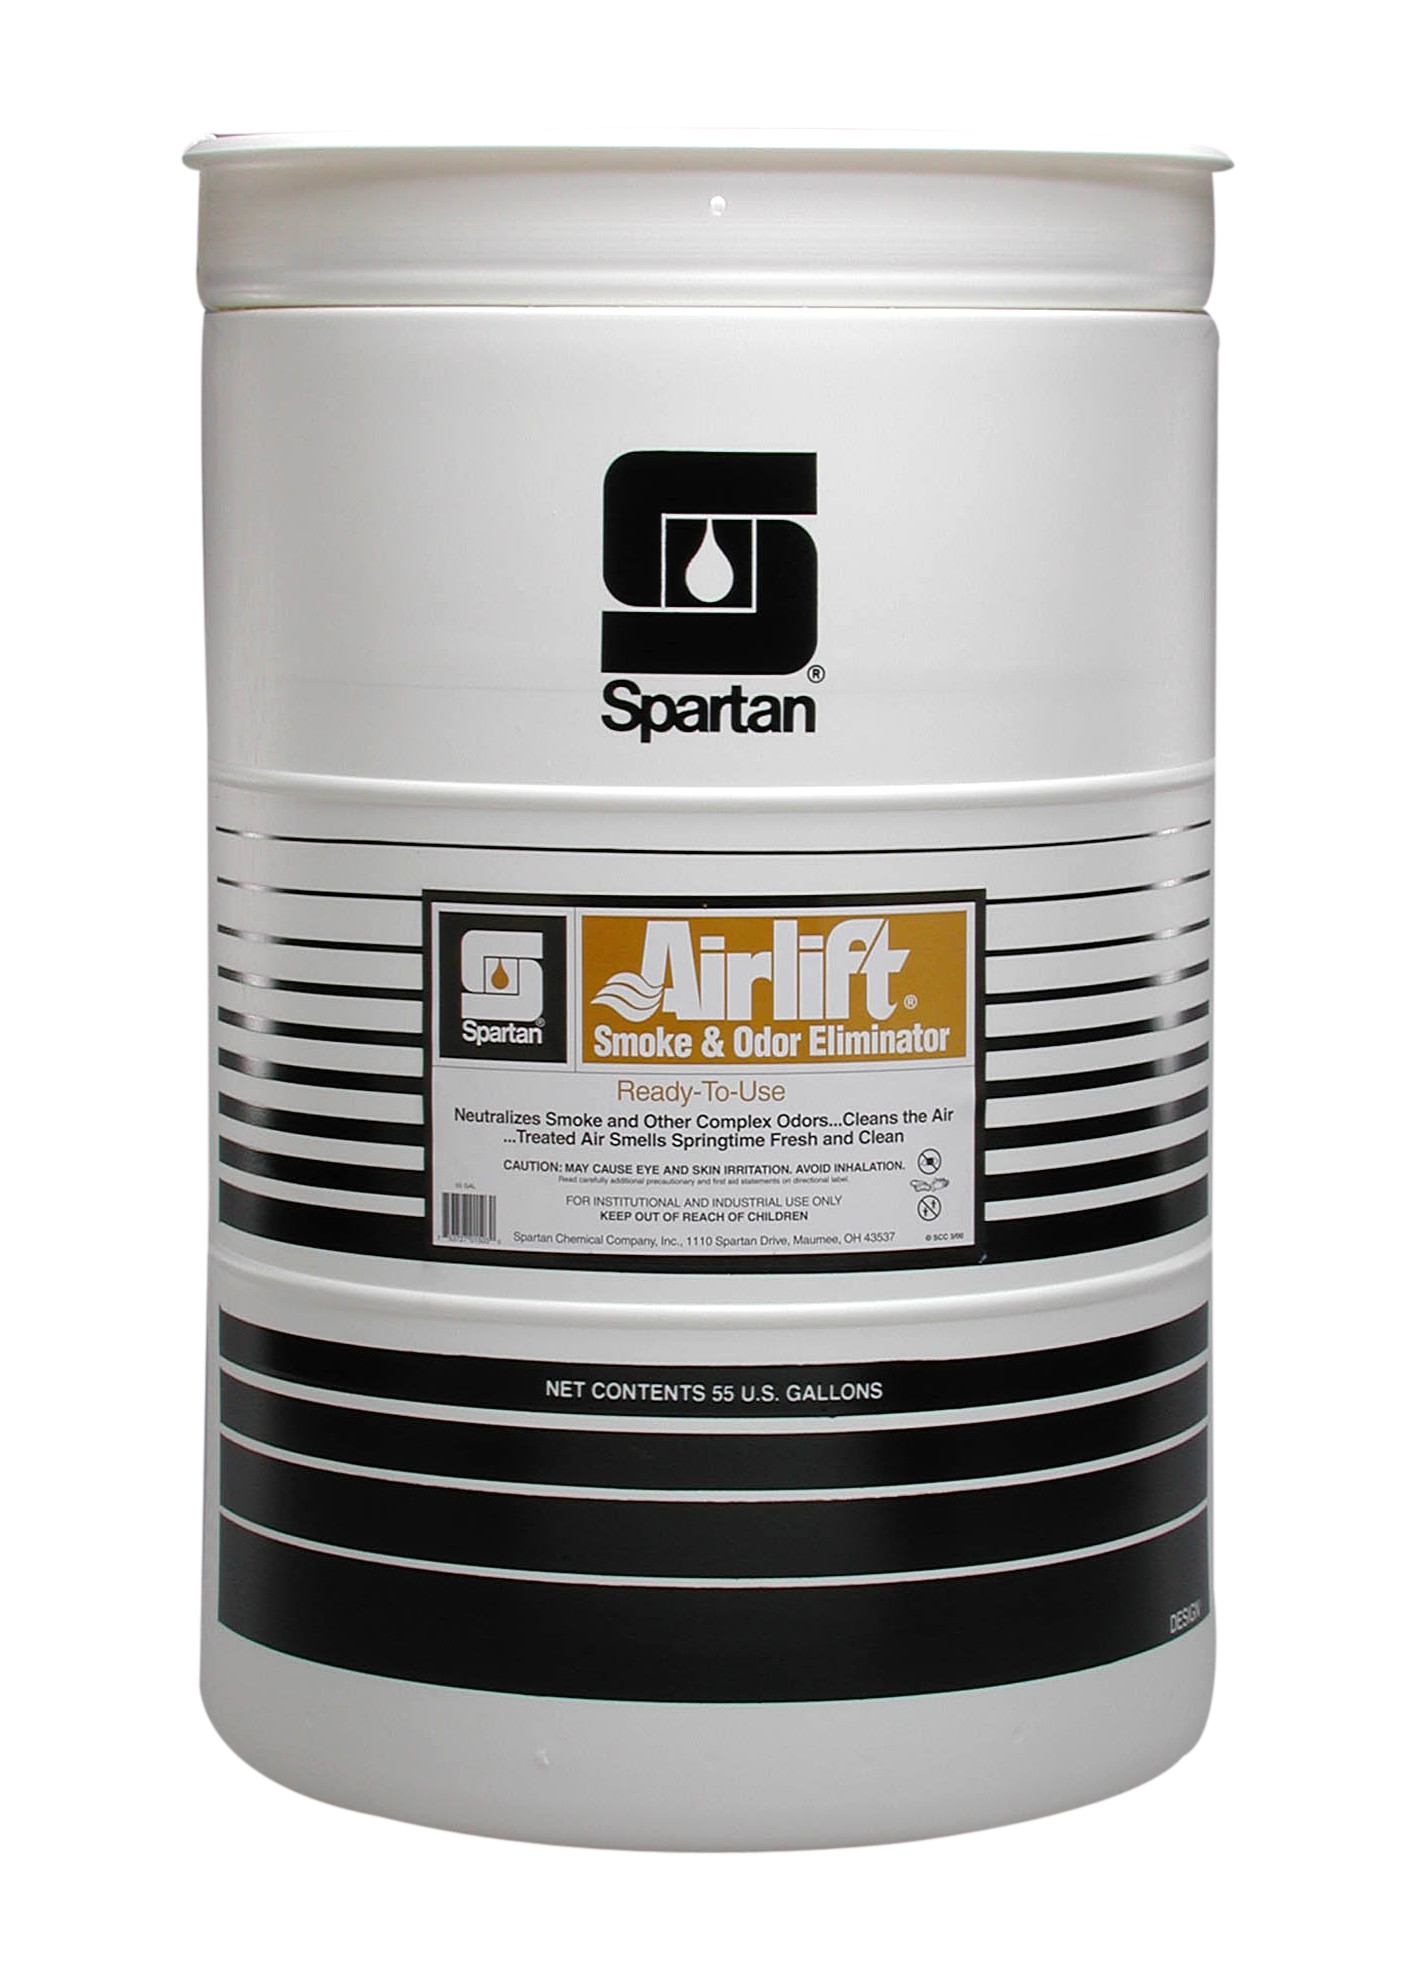 Spartan Chemical Company Airlift Smoke & Odor Eliminator, 55 GAL DRUM